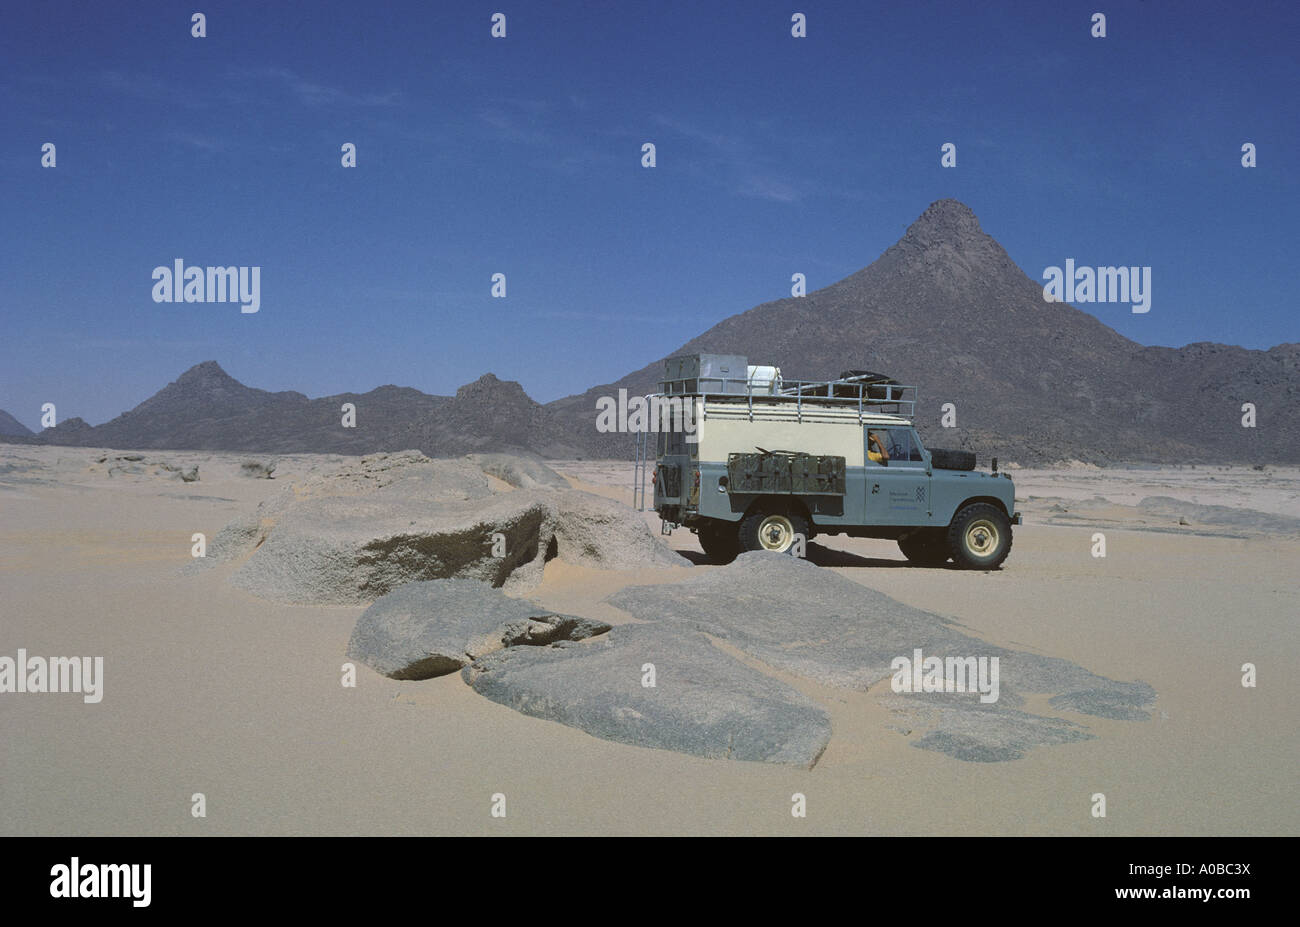 0254 07 A Series IIA one ton model Land Rover in front of Mount Tiska the main navigation marker in this part of the Sahara Dese Stock Photo